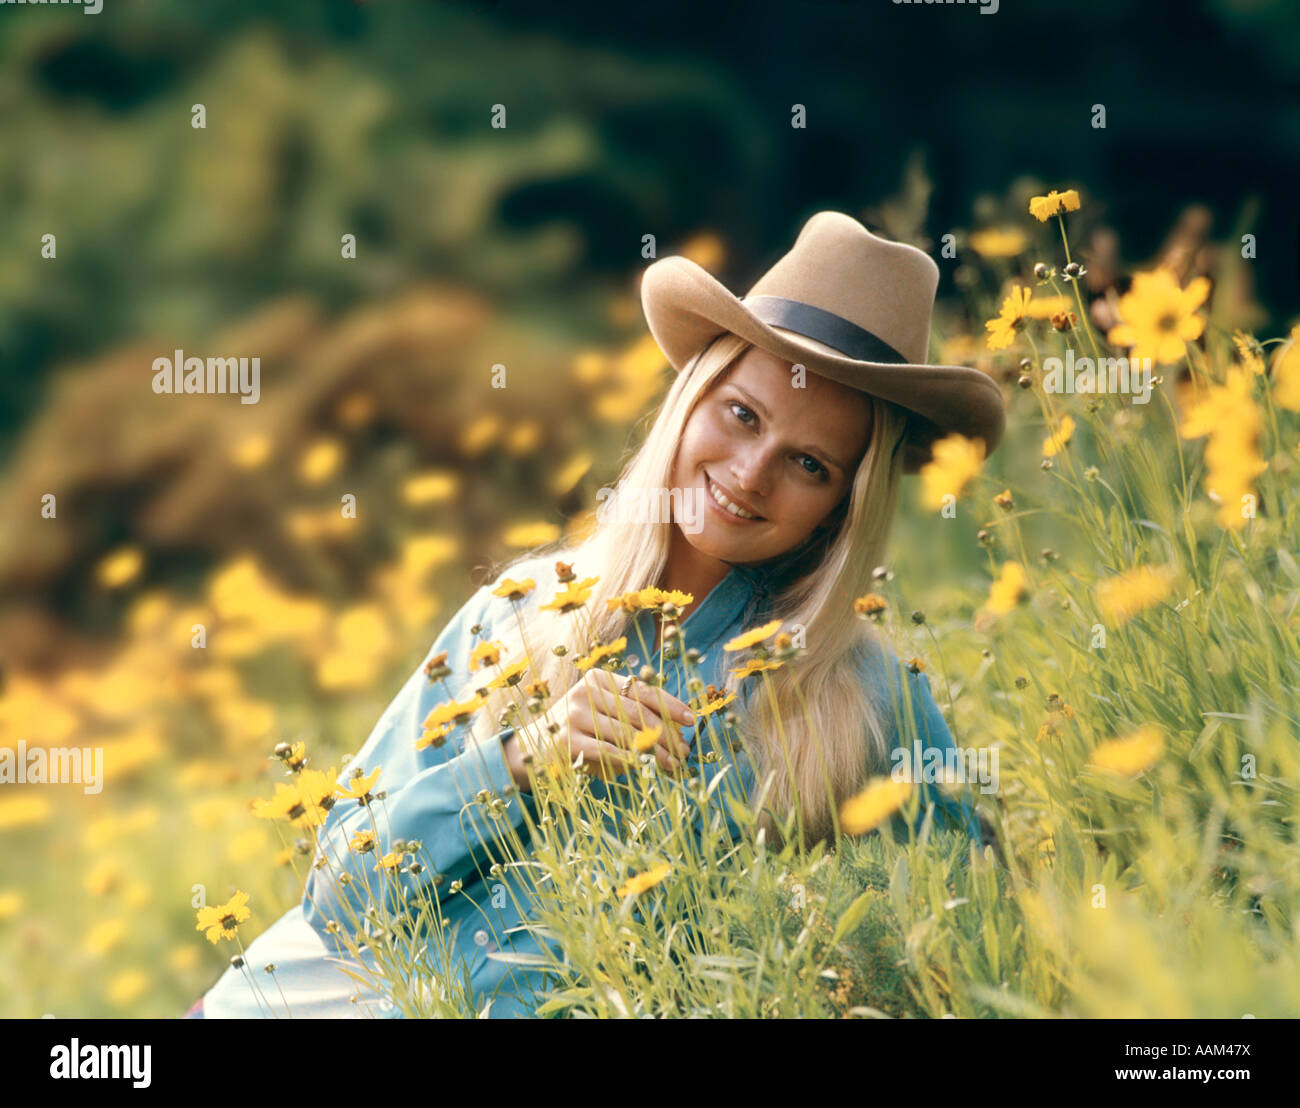 1970s RETRO BLOND WOMAN WEARING COWBOY HAT SITTING IN A FIELD OF BUTTERCUP WILD FLOWERS SMILING Stock Photo